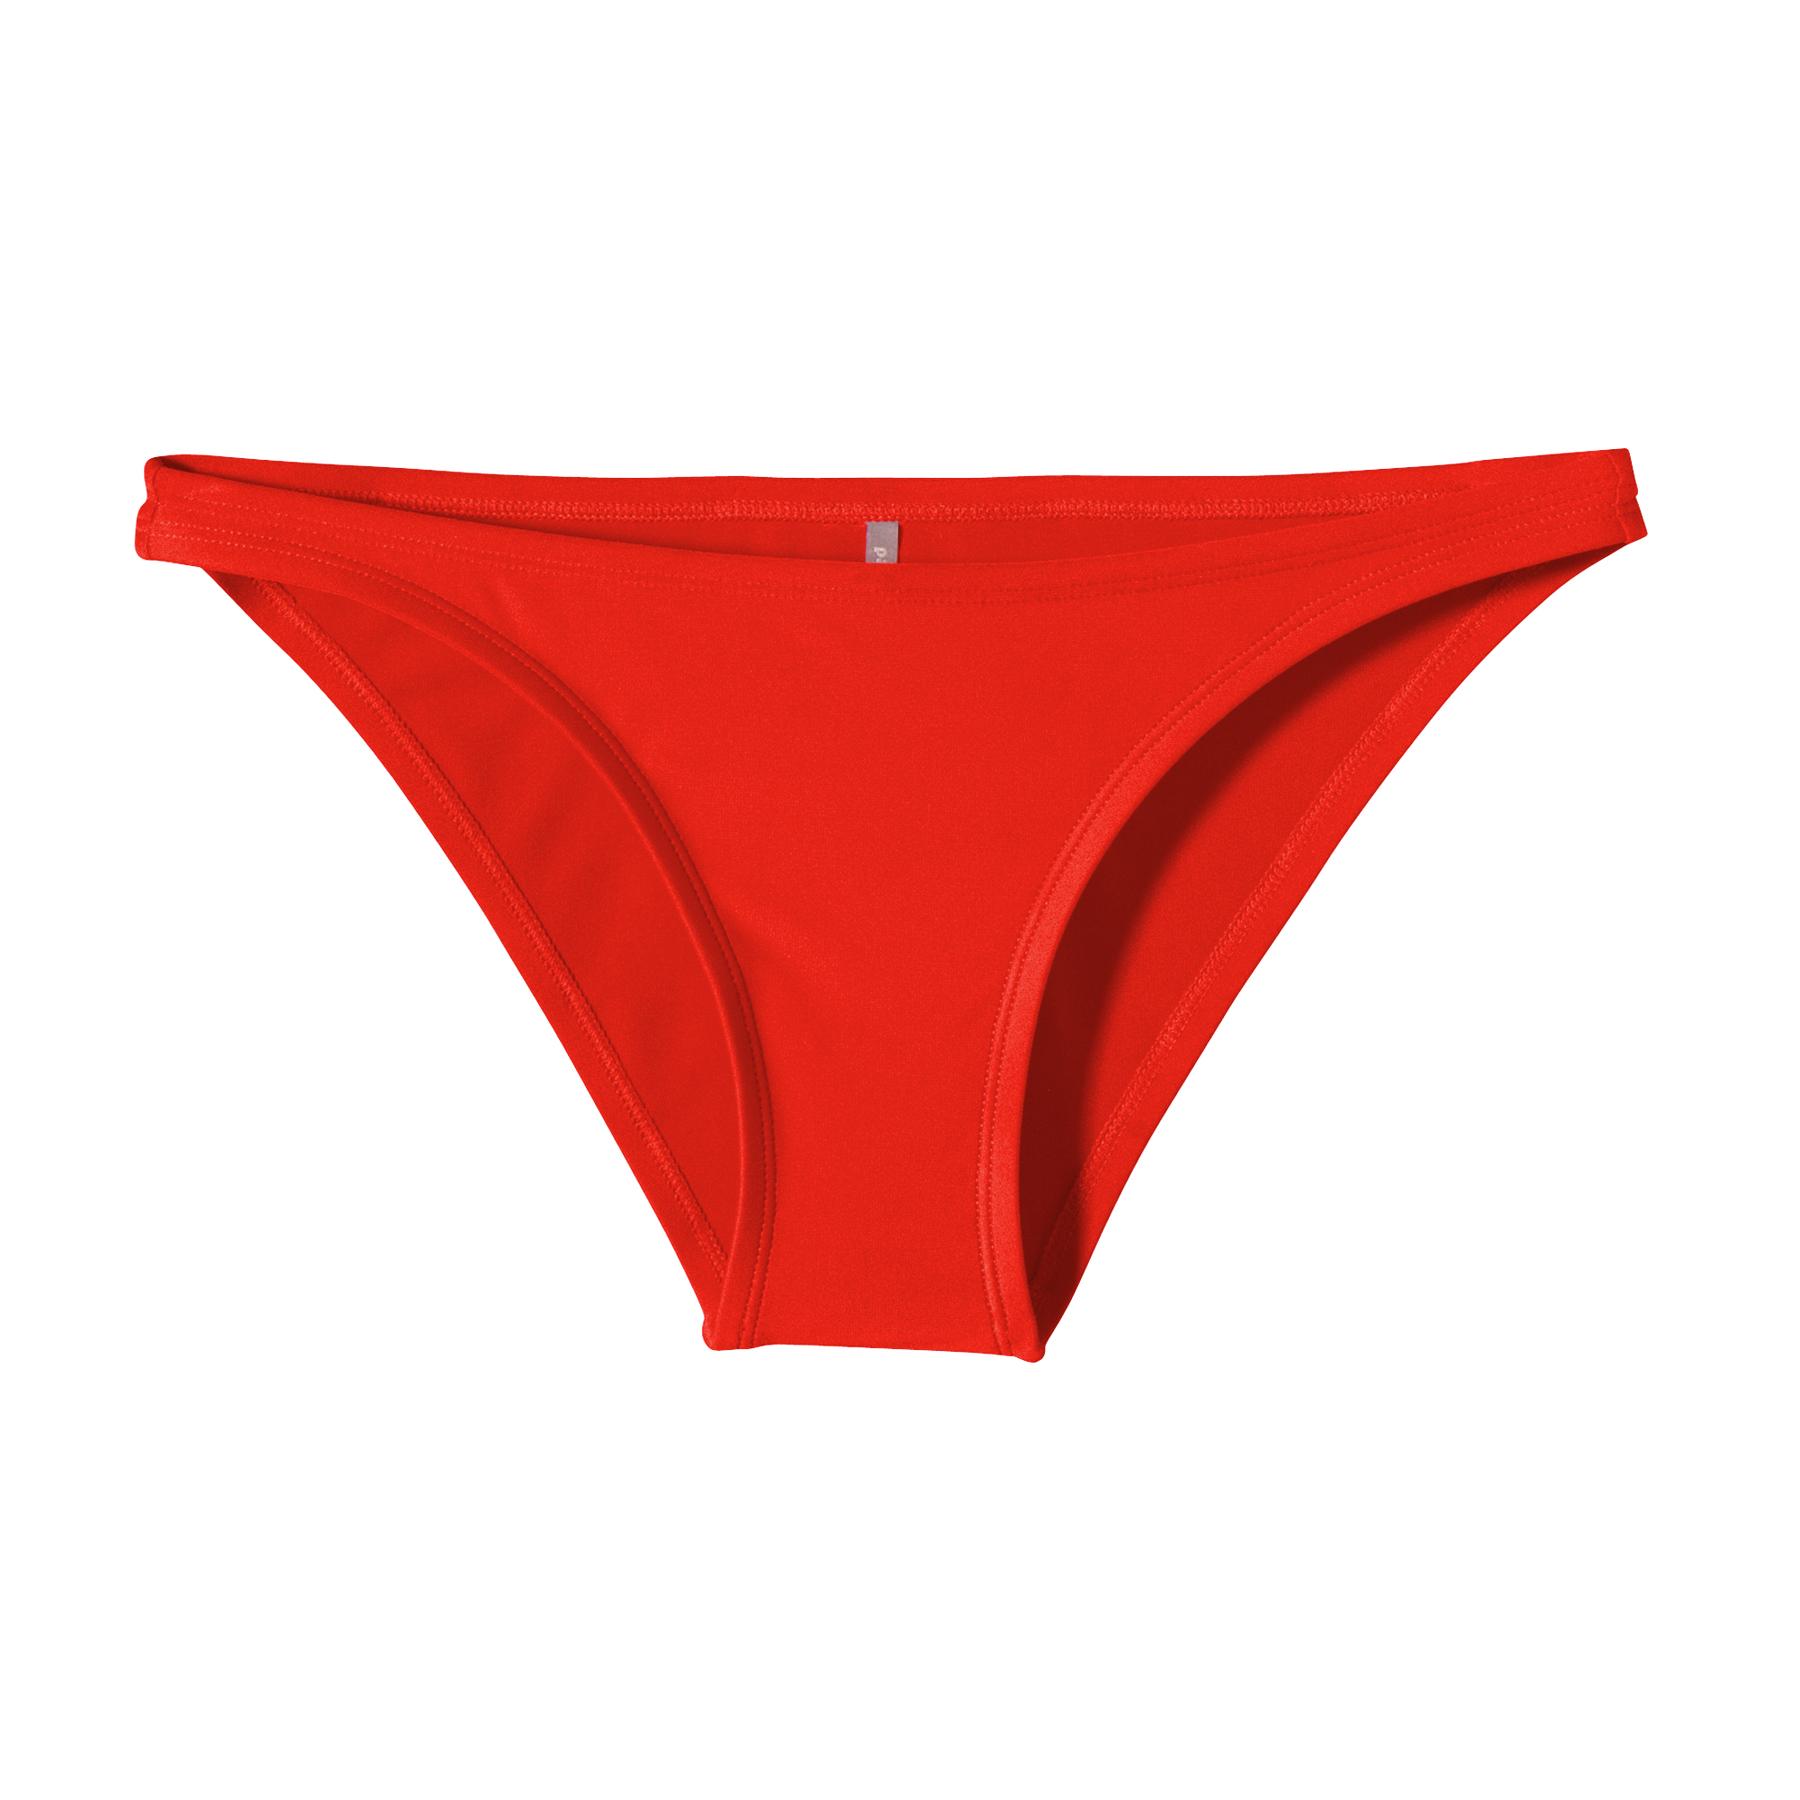 Foto Patagonia Adour Bottoms Lady Solid Paintbrush Red (Modell 2013)